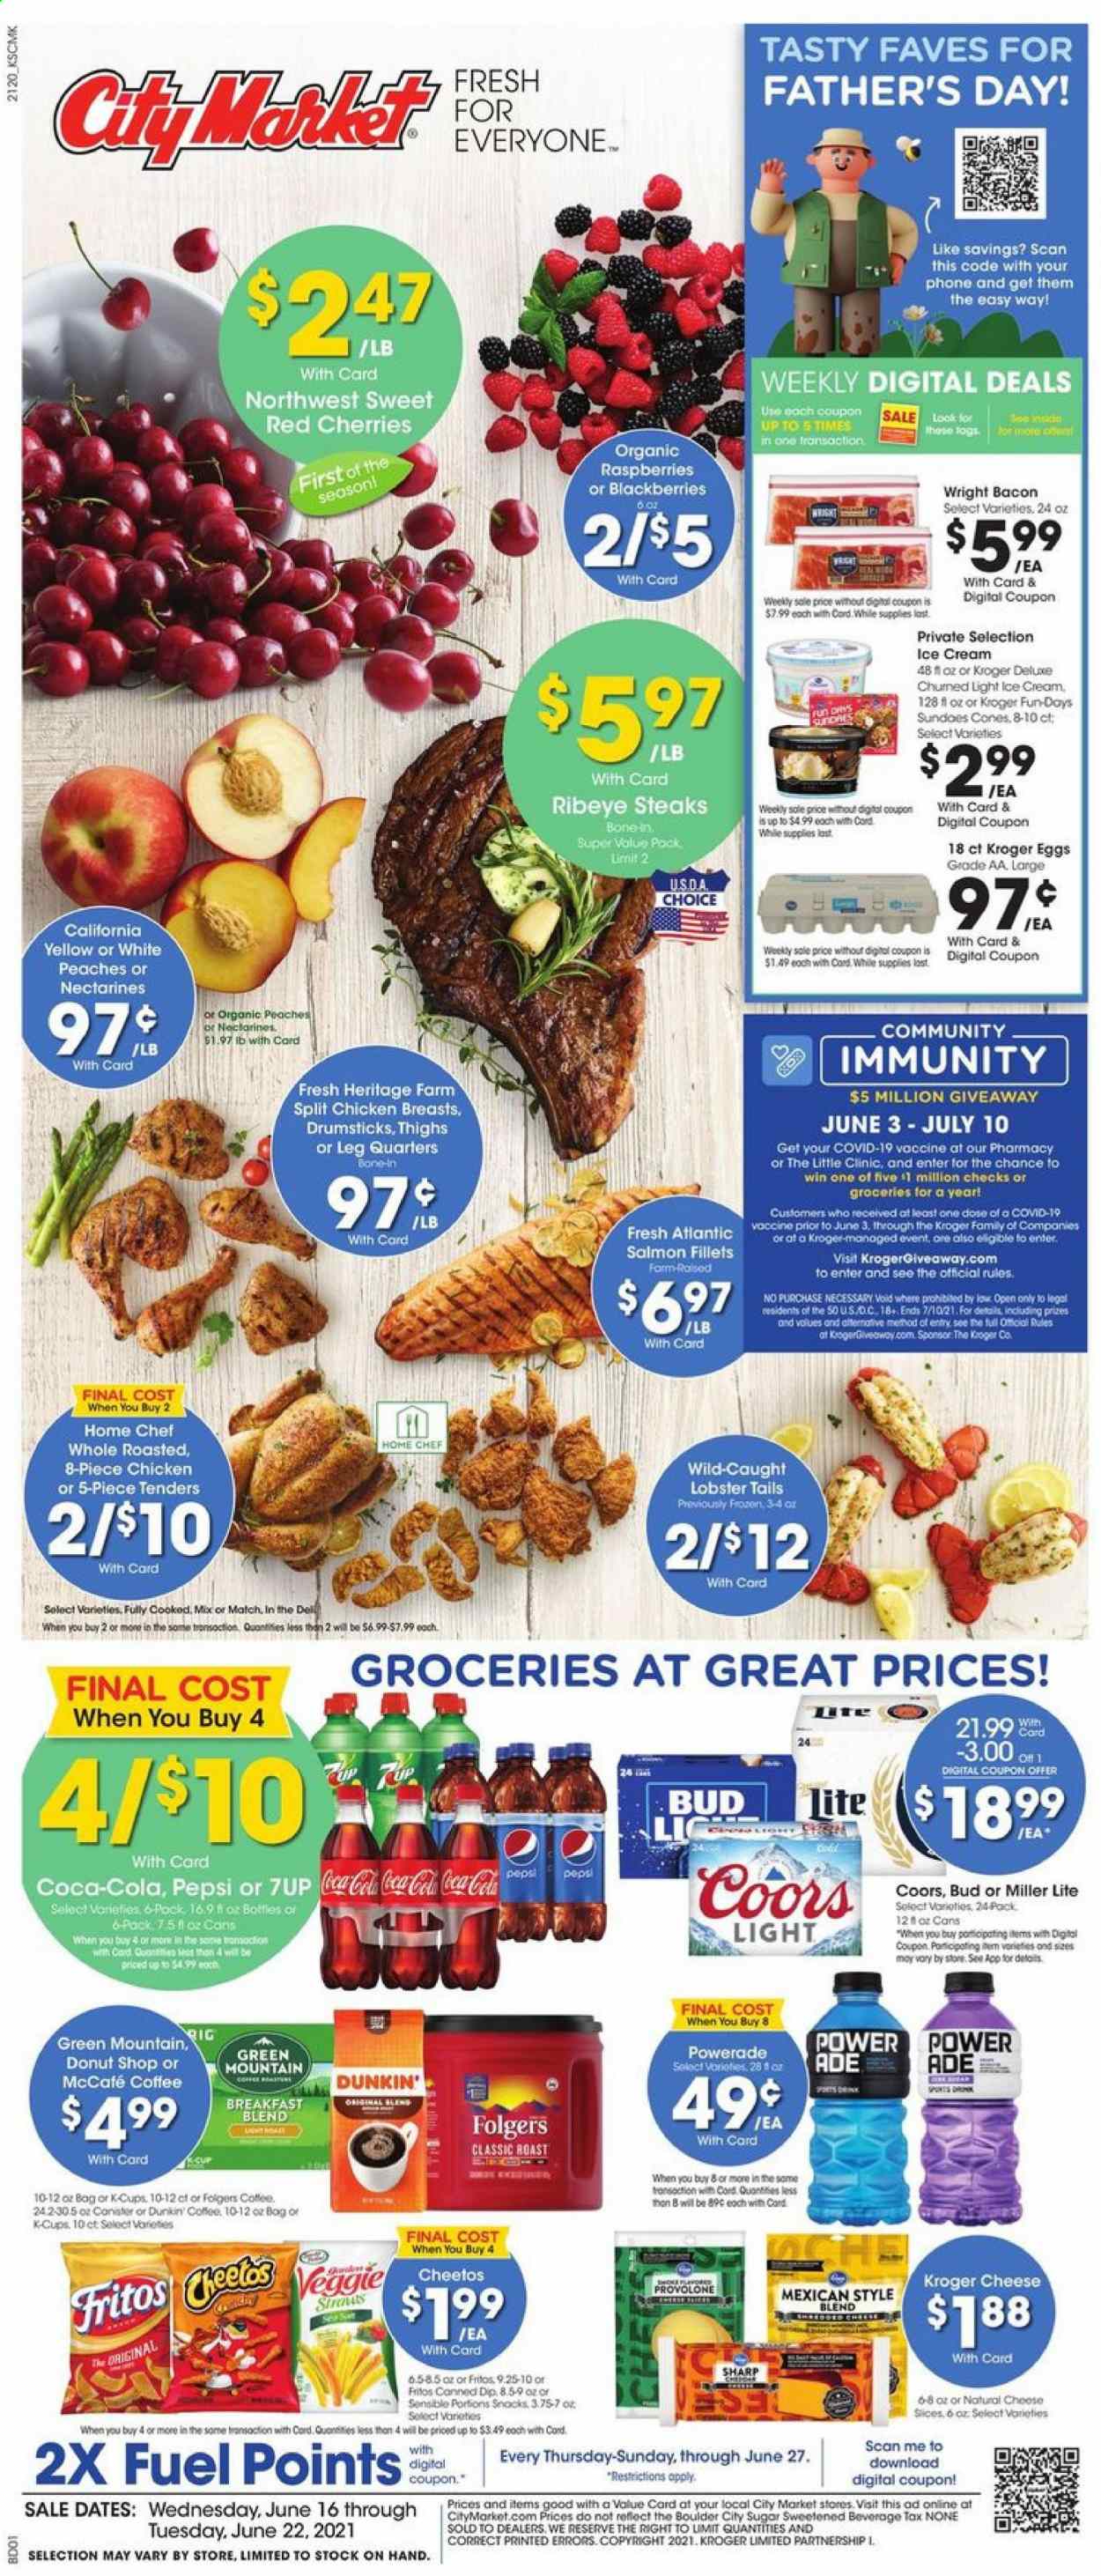 thumbnail - City Market Flyer - 06/16/2021 - 06/22/2021 - Sales products - blackberries, raspberries, cherries, cod, lobster, salmon, salmon fillet, lobster tail, bacon, cheese, Provolone, eggs, ice cream, snack, Fritos, Cheetos, sugar, Coca-Cola, Powerade, Pepsi, 7UP, coffee, Folgers, McCafe, breakfast blend, Green Mountain, beer, Miller Lite, Coors, chicken breasts, beef meat, steak, ribeye steak, Sharp, nectarines, peaches. Page 1.